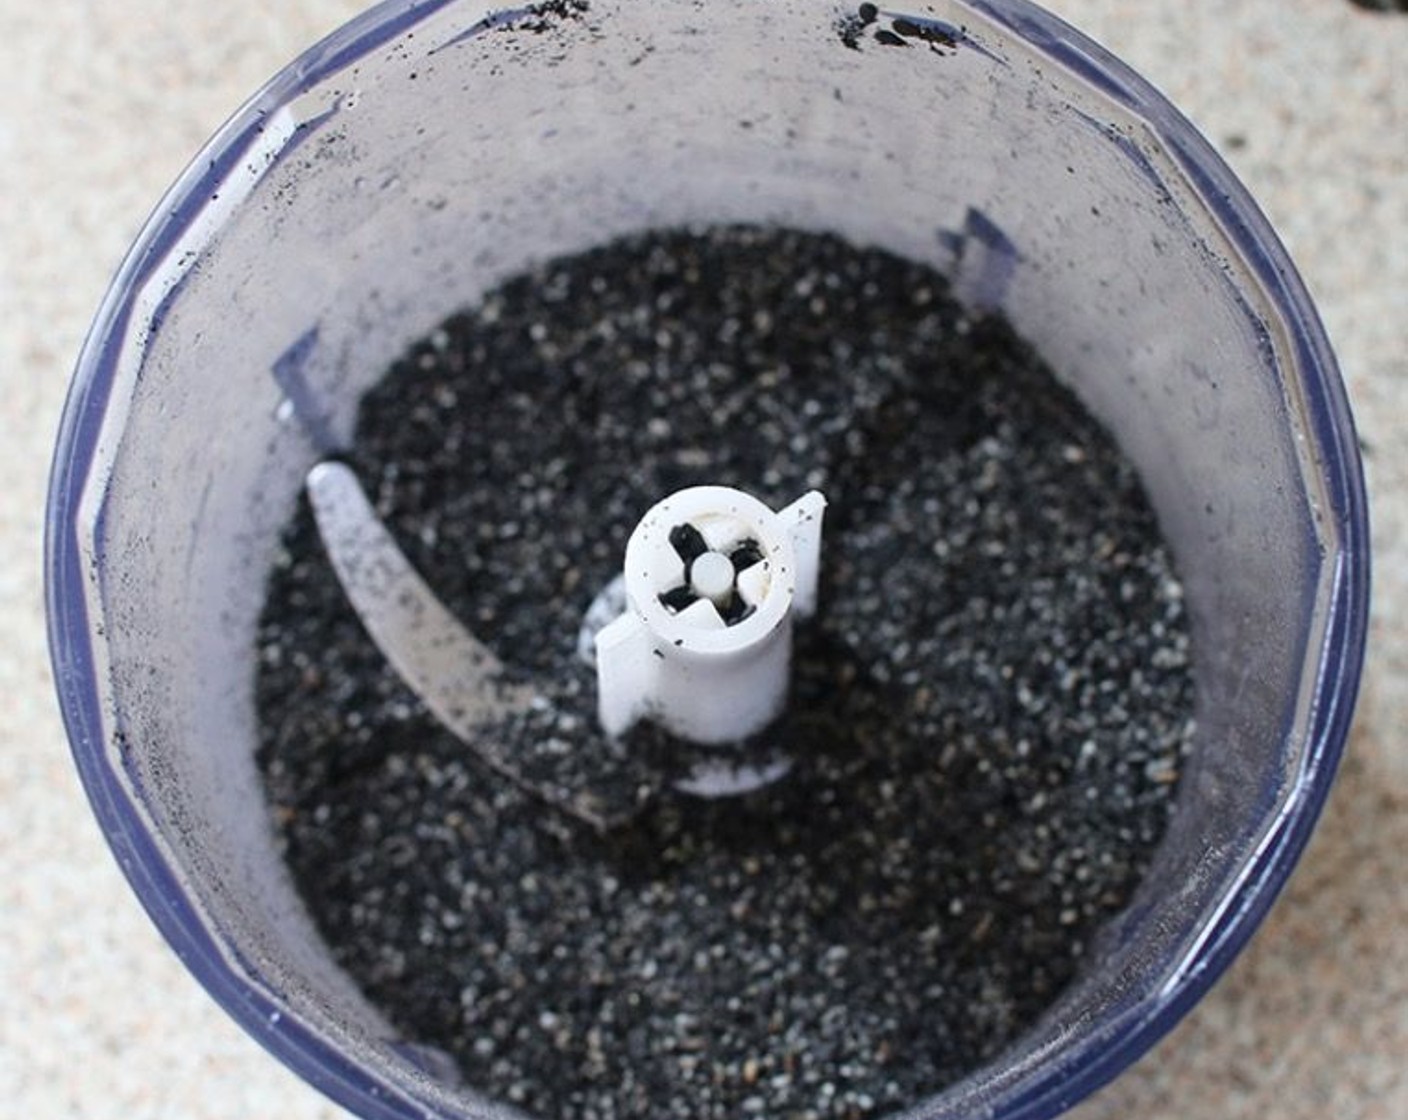 step 1 Grind the Black Sesame Seeds (1/3 cup) into a powder with a food processor or mortar and pestle.